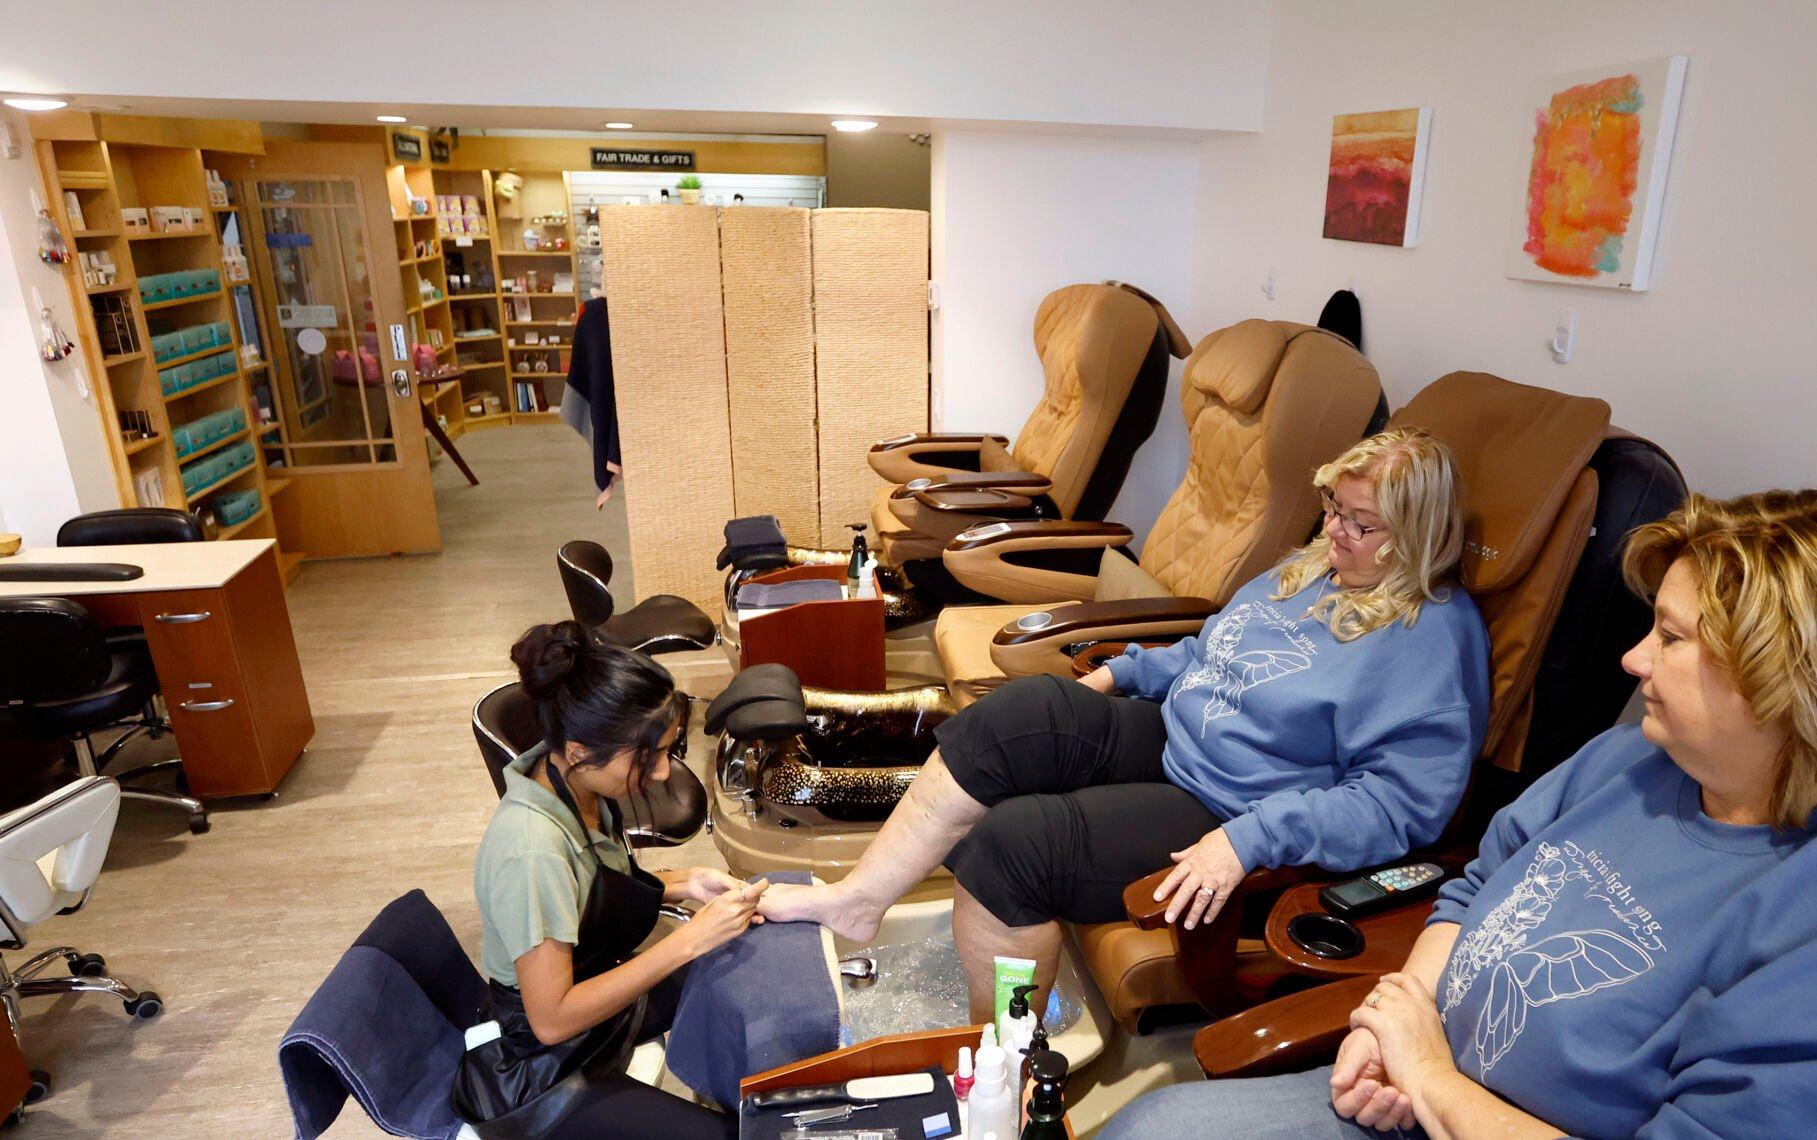 Laura Fernandes (left), a cosmetologist at Body & Soul Wellness Center and Spa, gives pedicures to Lisa Harmon (middle), of Otter Creek, Iowa, and Jan Gill, of Dubuque.    PHOTO CREDIT: Jessica Reilly